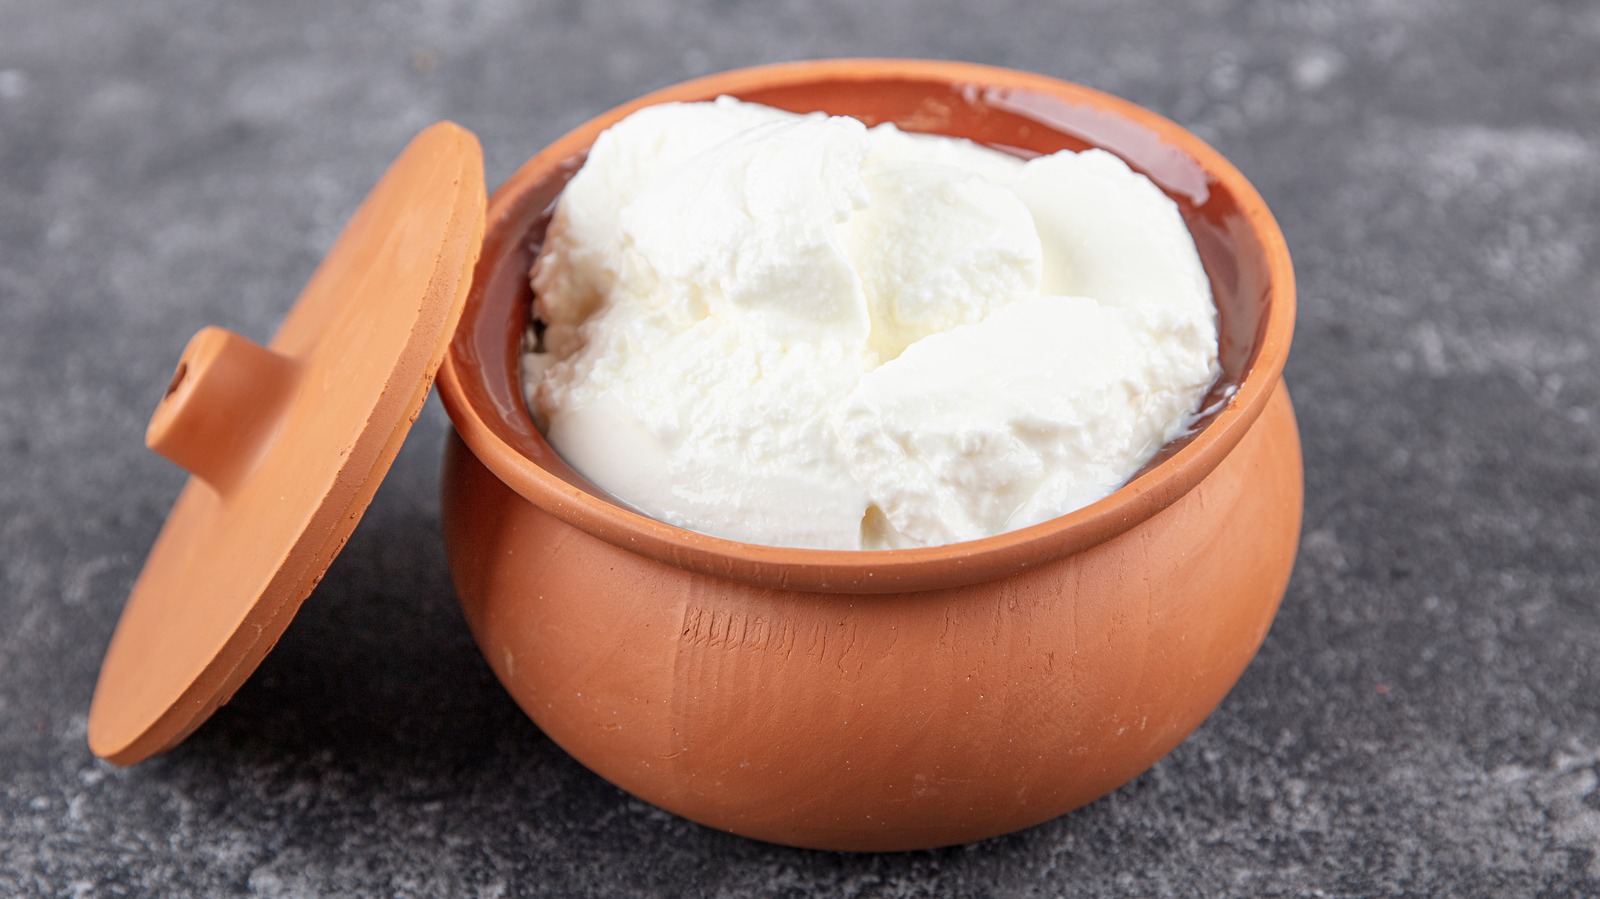 Quark: The Soft Cheese Product That's Sometimes Confused With Yogurt